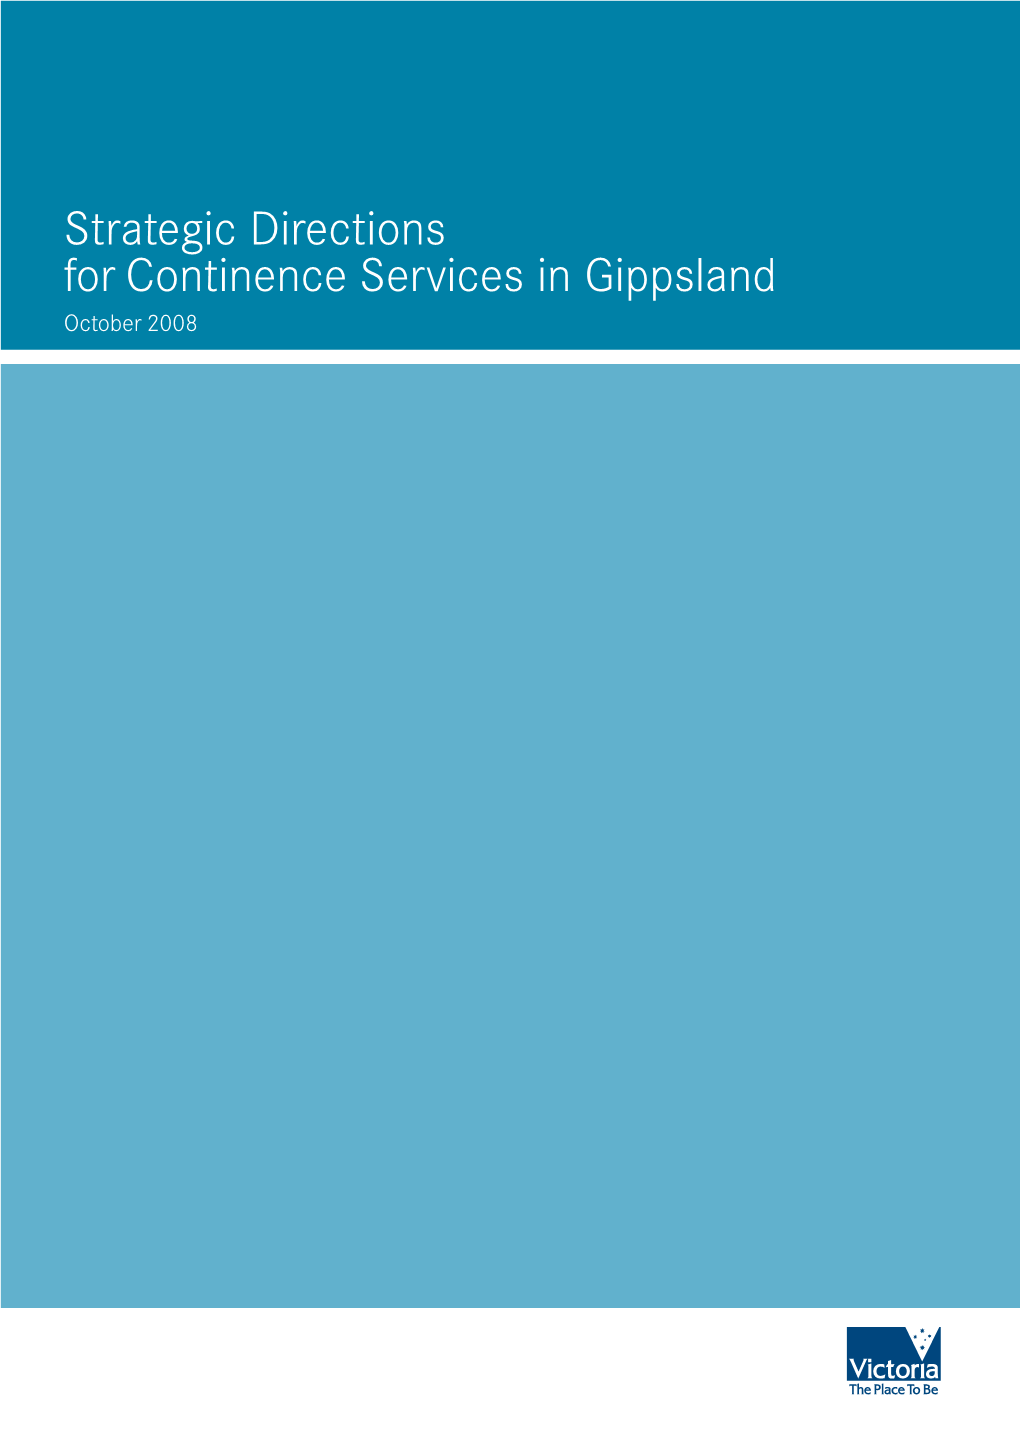 Strategic Directions for Continence Services in Gippsland